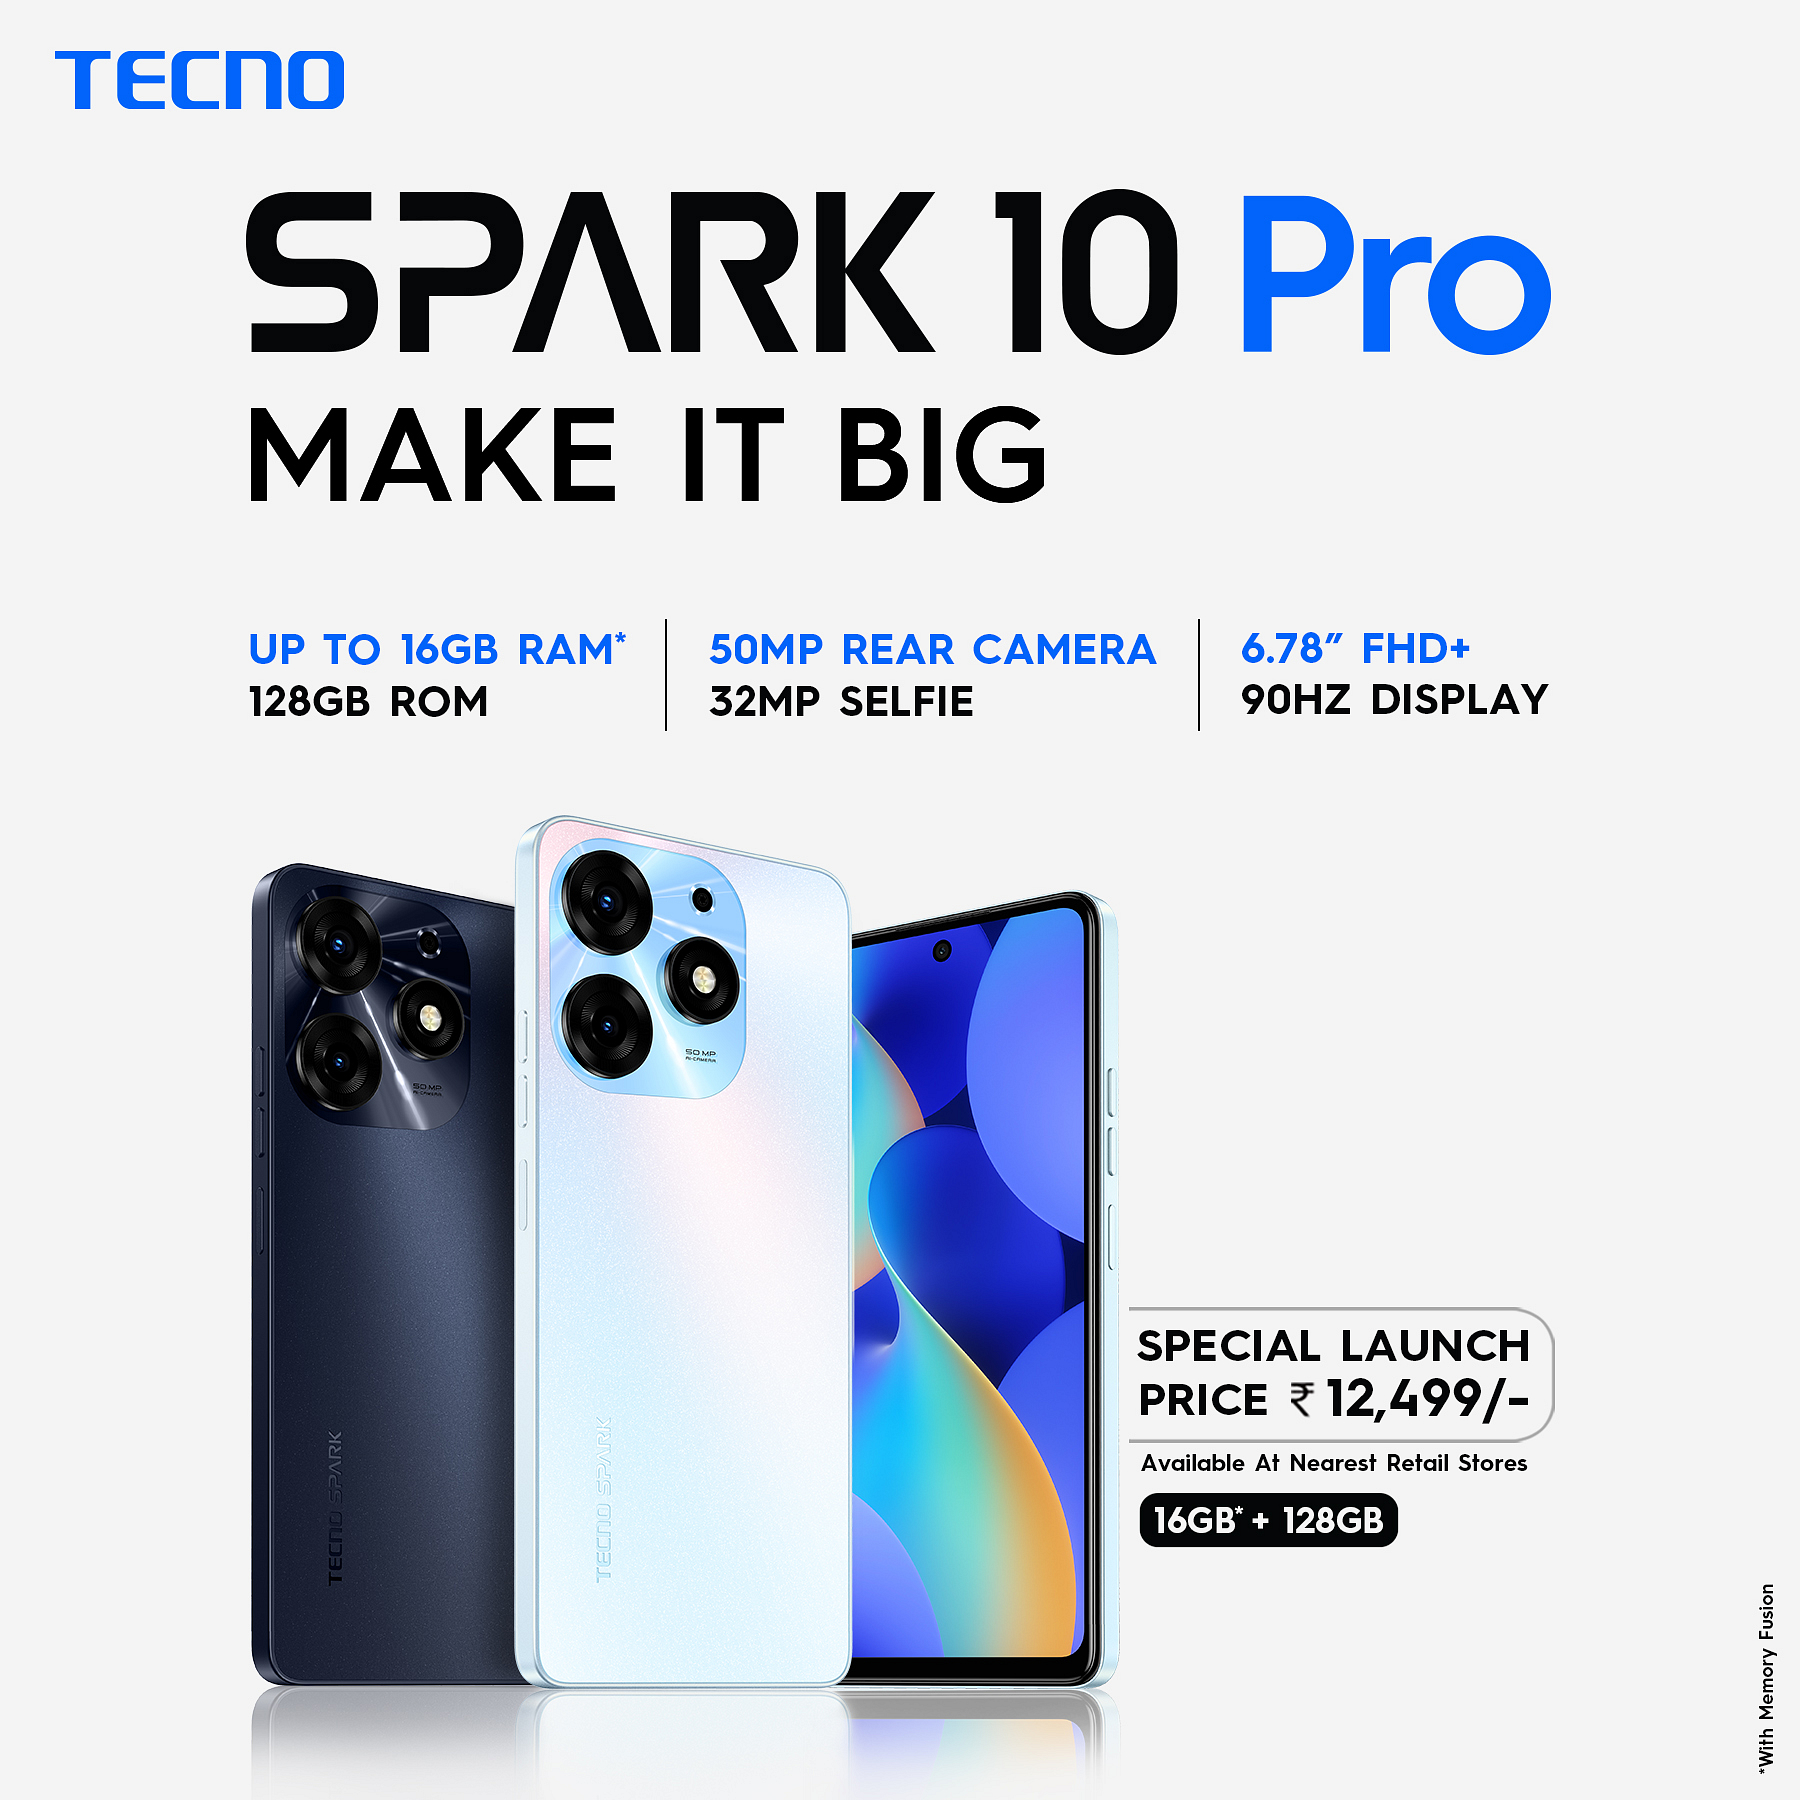 Tecno Spark 10 Pro With 90Hz Display, Whopping 16GB RAM Launched At